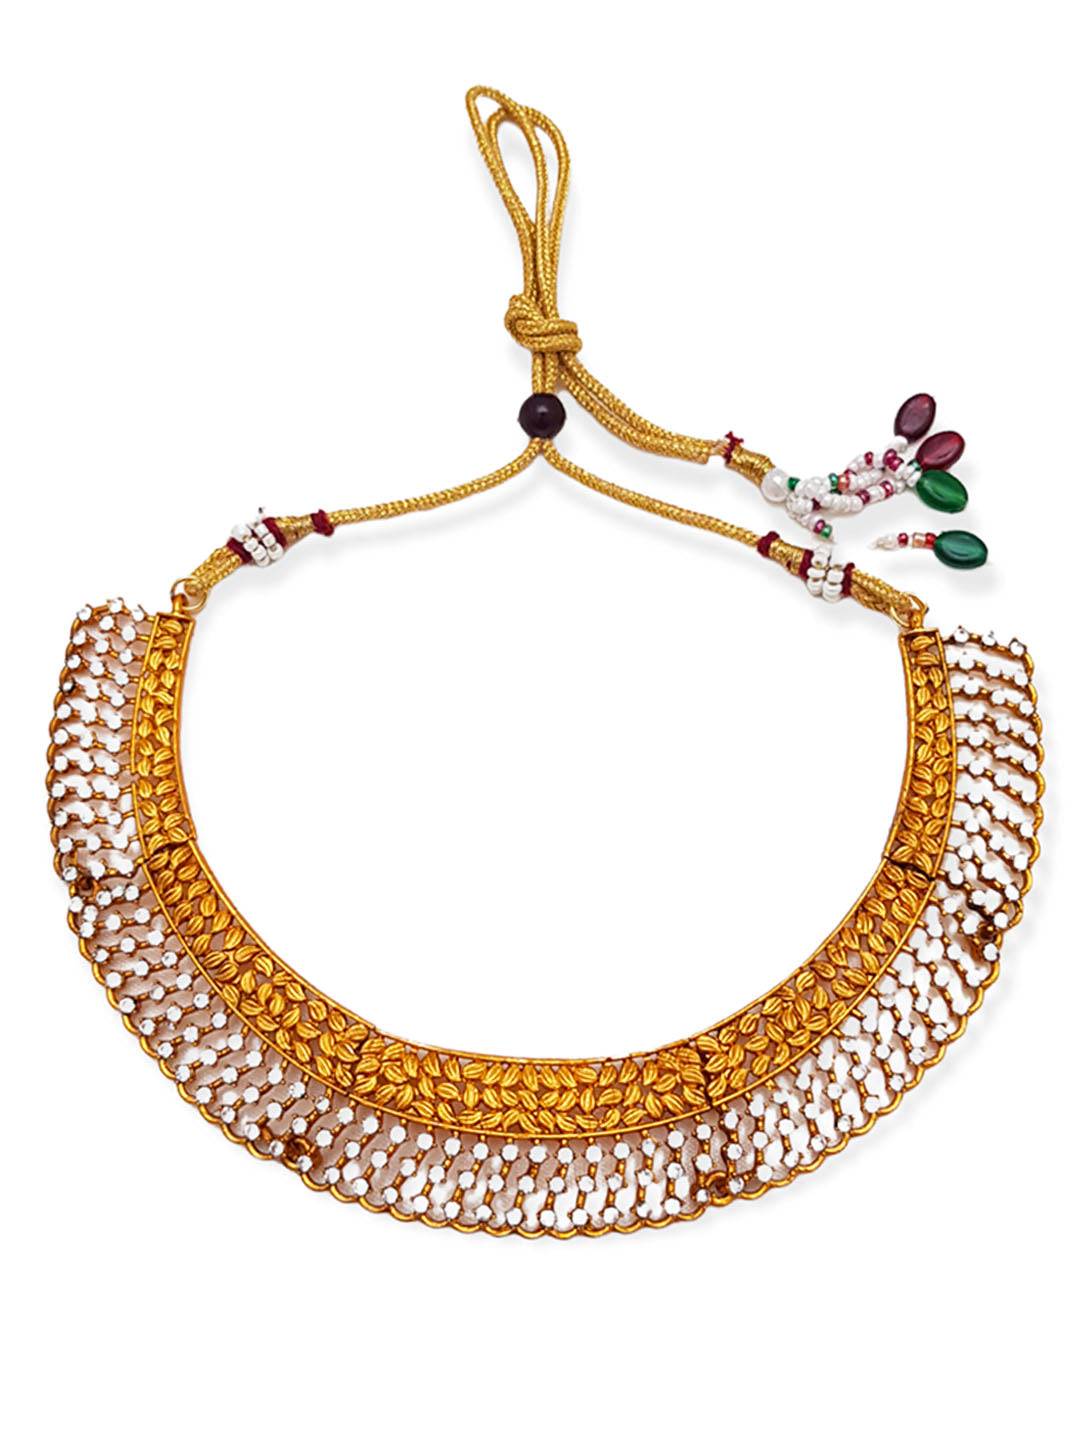 Designer Necklace with cz stones Necklace 6524N